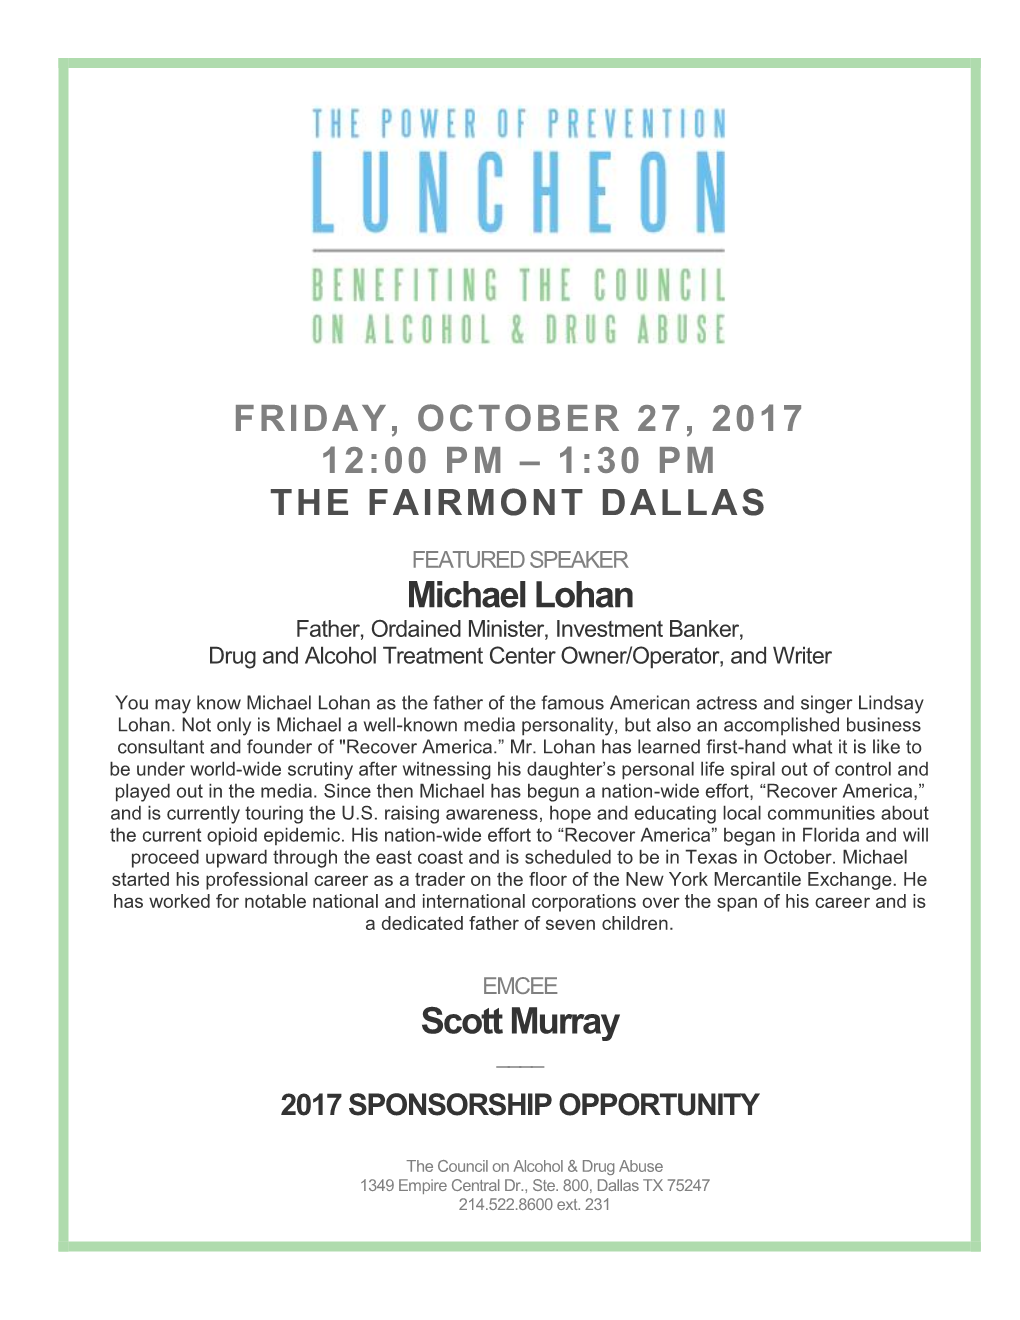 Friday, October 27, 2017 12:00 Pm – 1:30 Pm the Fairmont Dallas